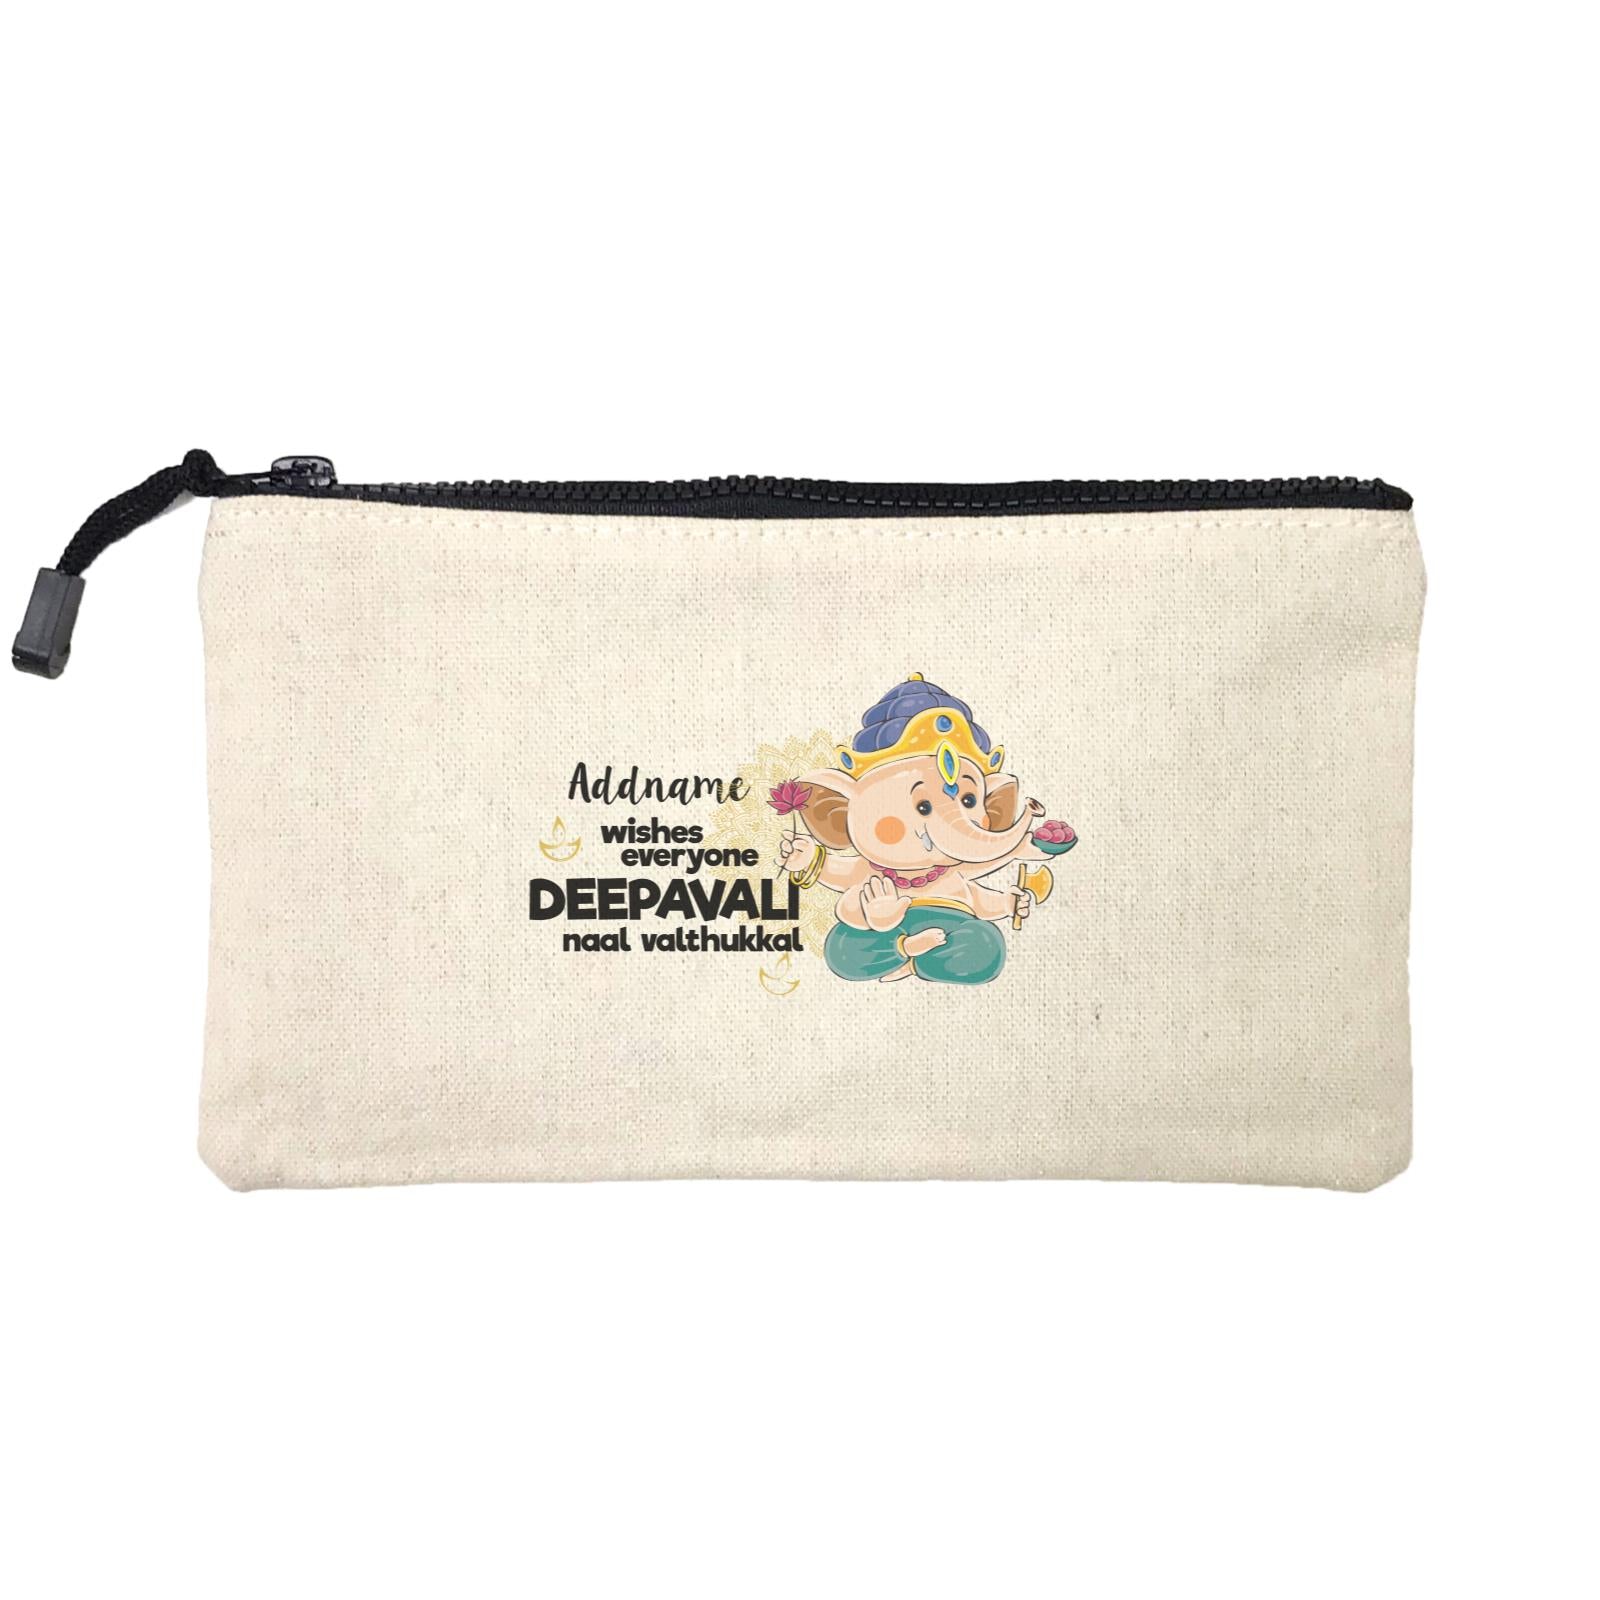 Cute Ganesha Addname Wishes Everyone Deepavali Mini Accessories Stationery Pouch